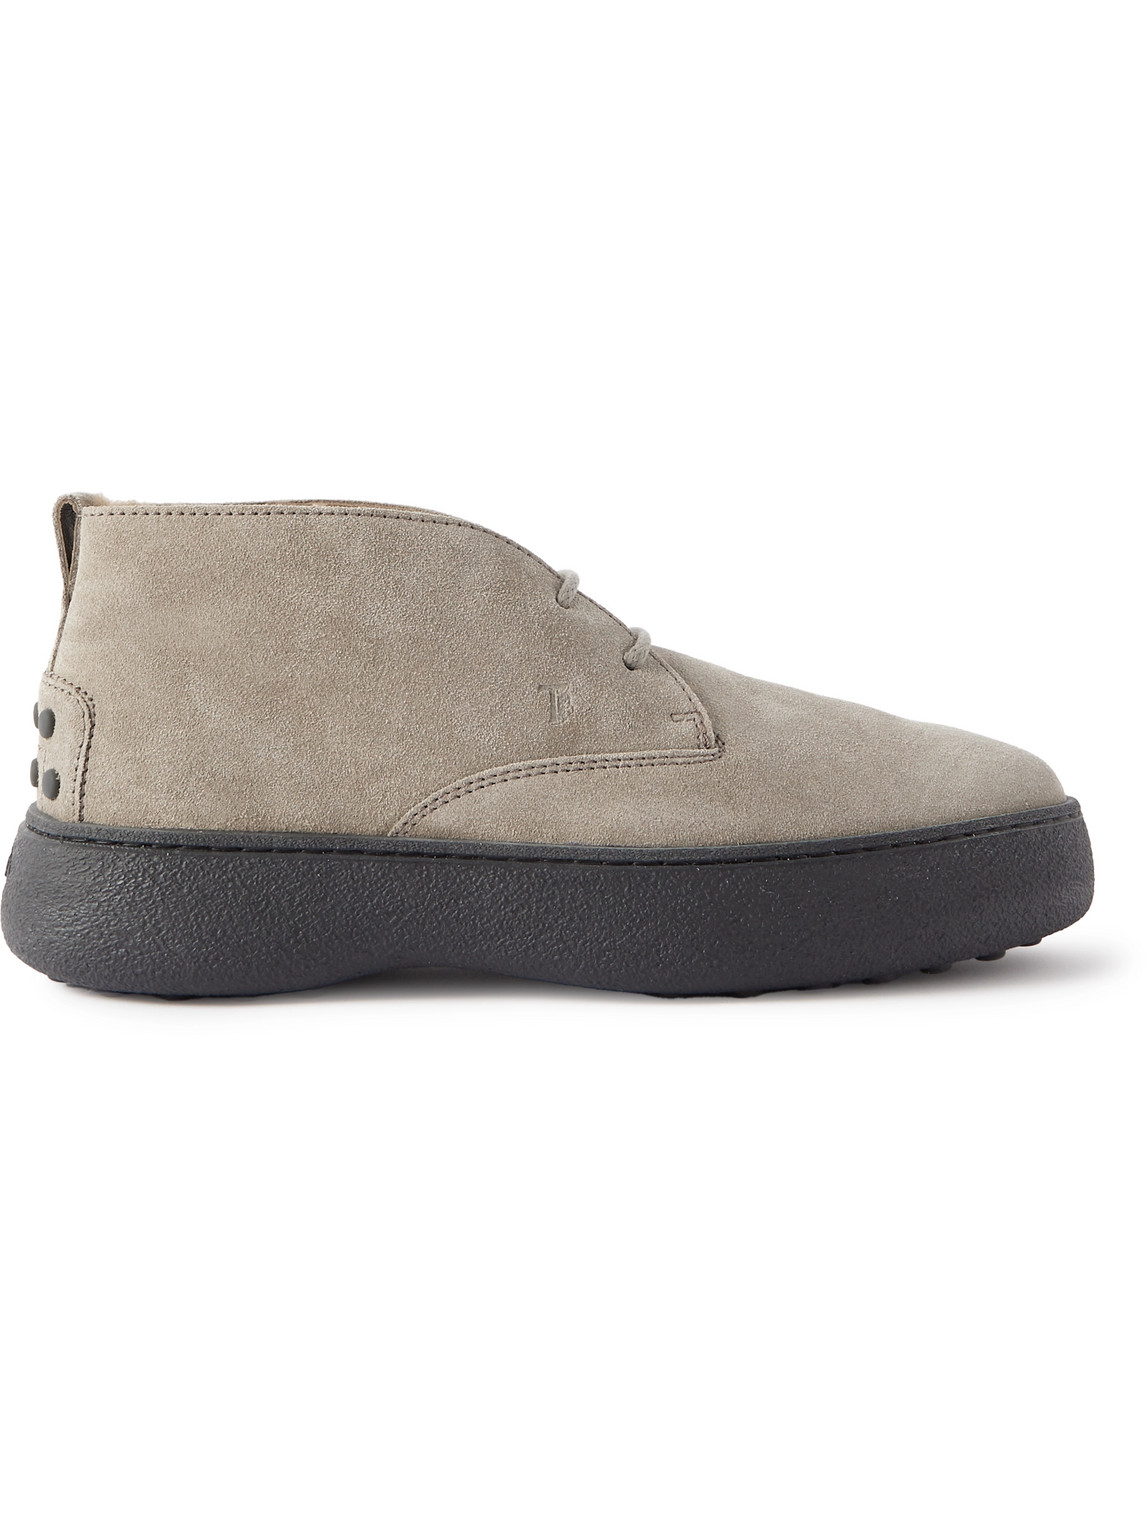 Shearling-Lined Suede Chukka Boots